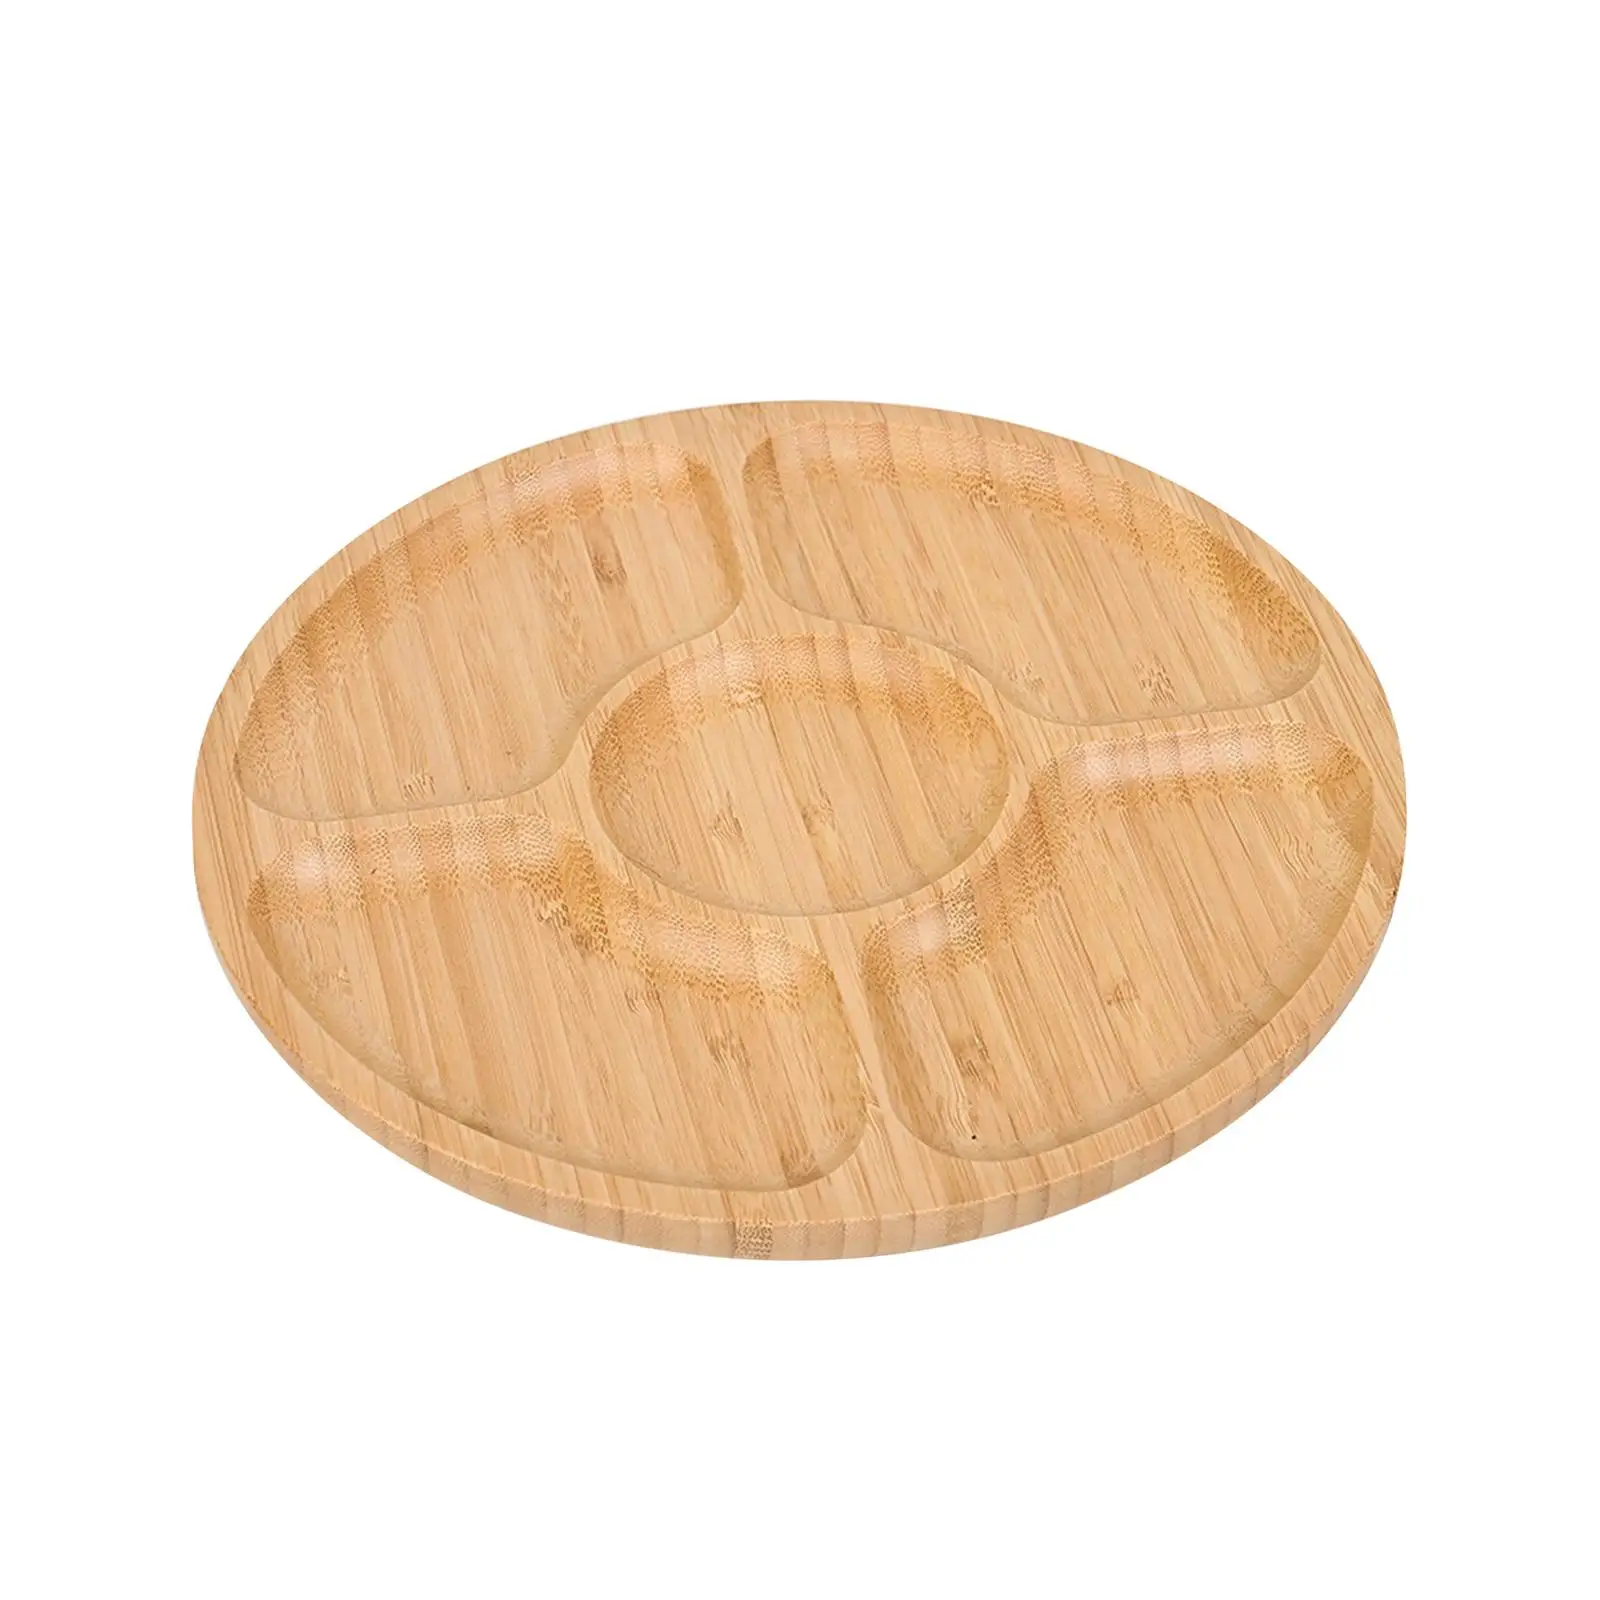 Wooden Tray Display Round Shaped Round Wood Tray for Wedding Dinner